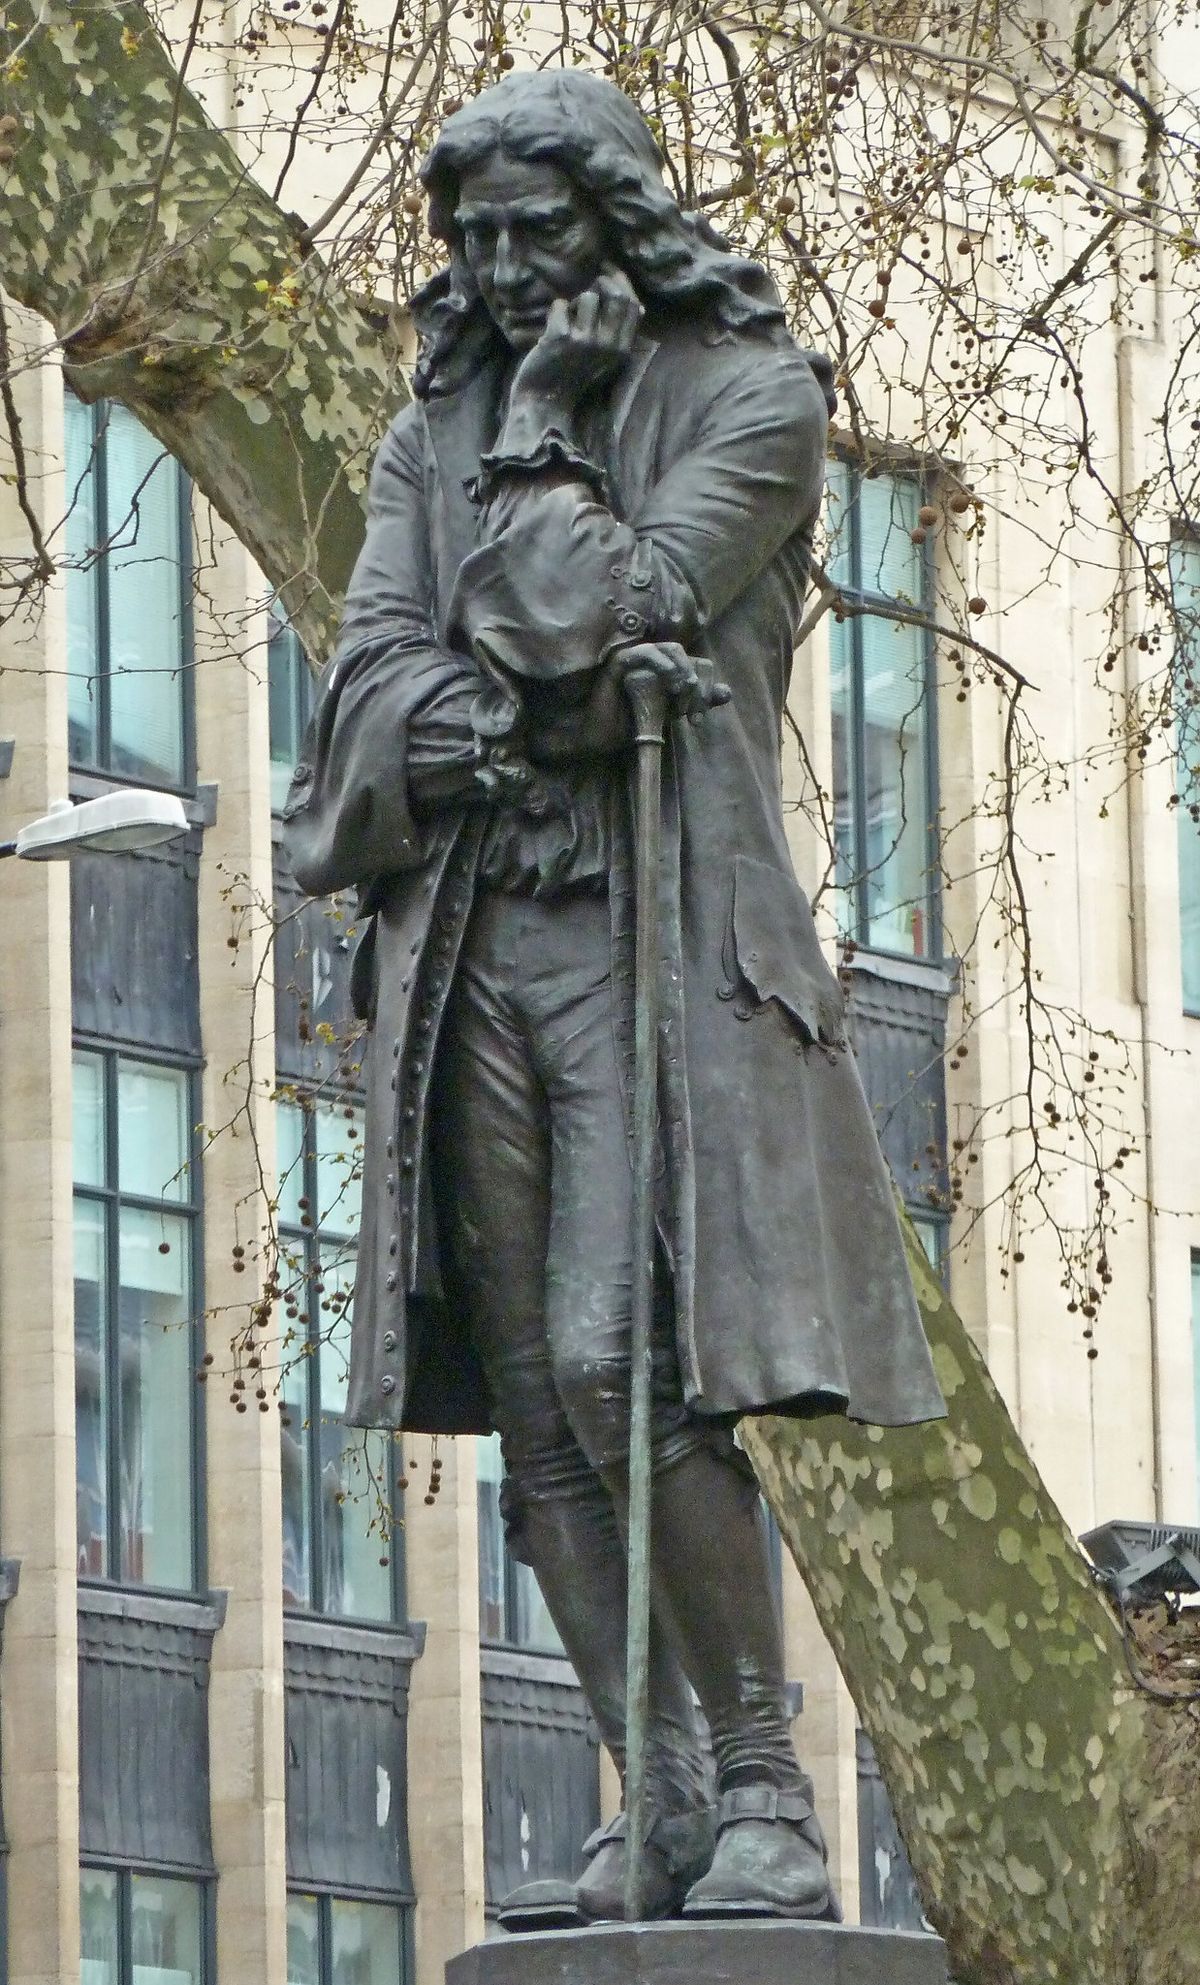 The statue of slave trader Edward Colston in Bristol was removed by anti-racism protestors 